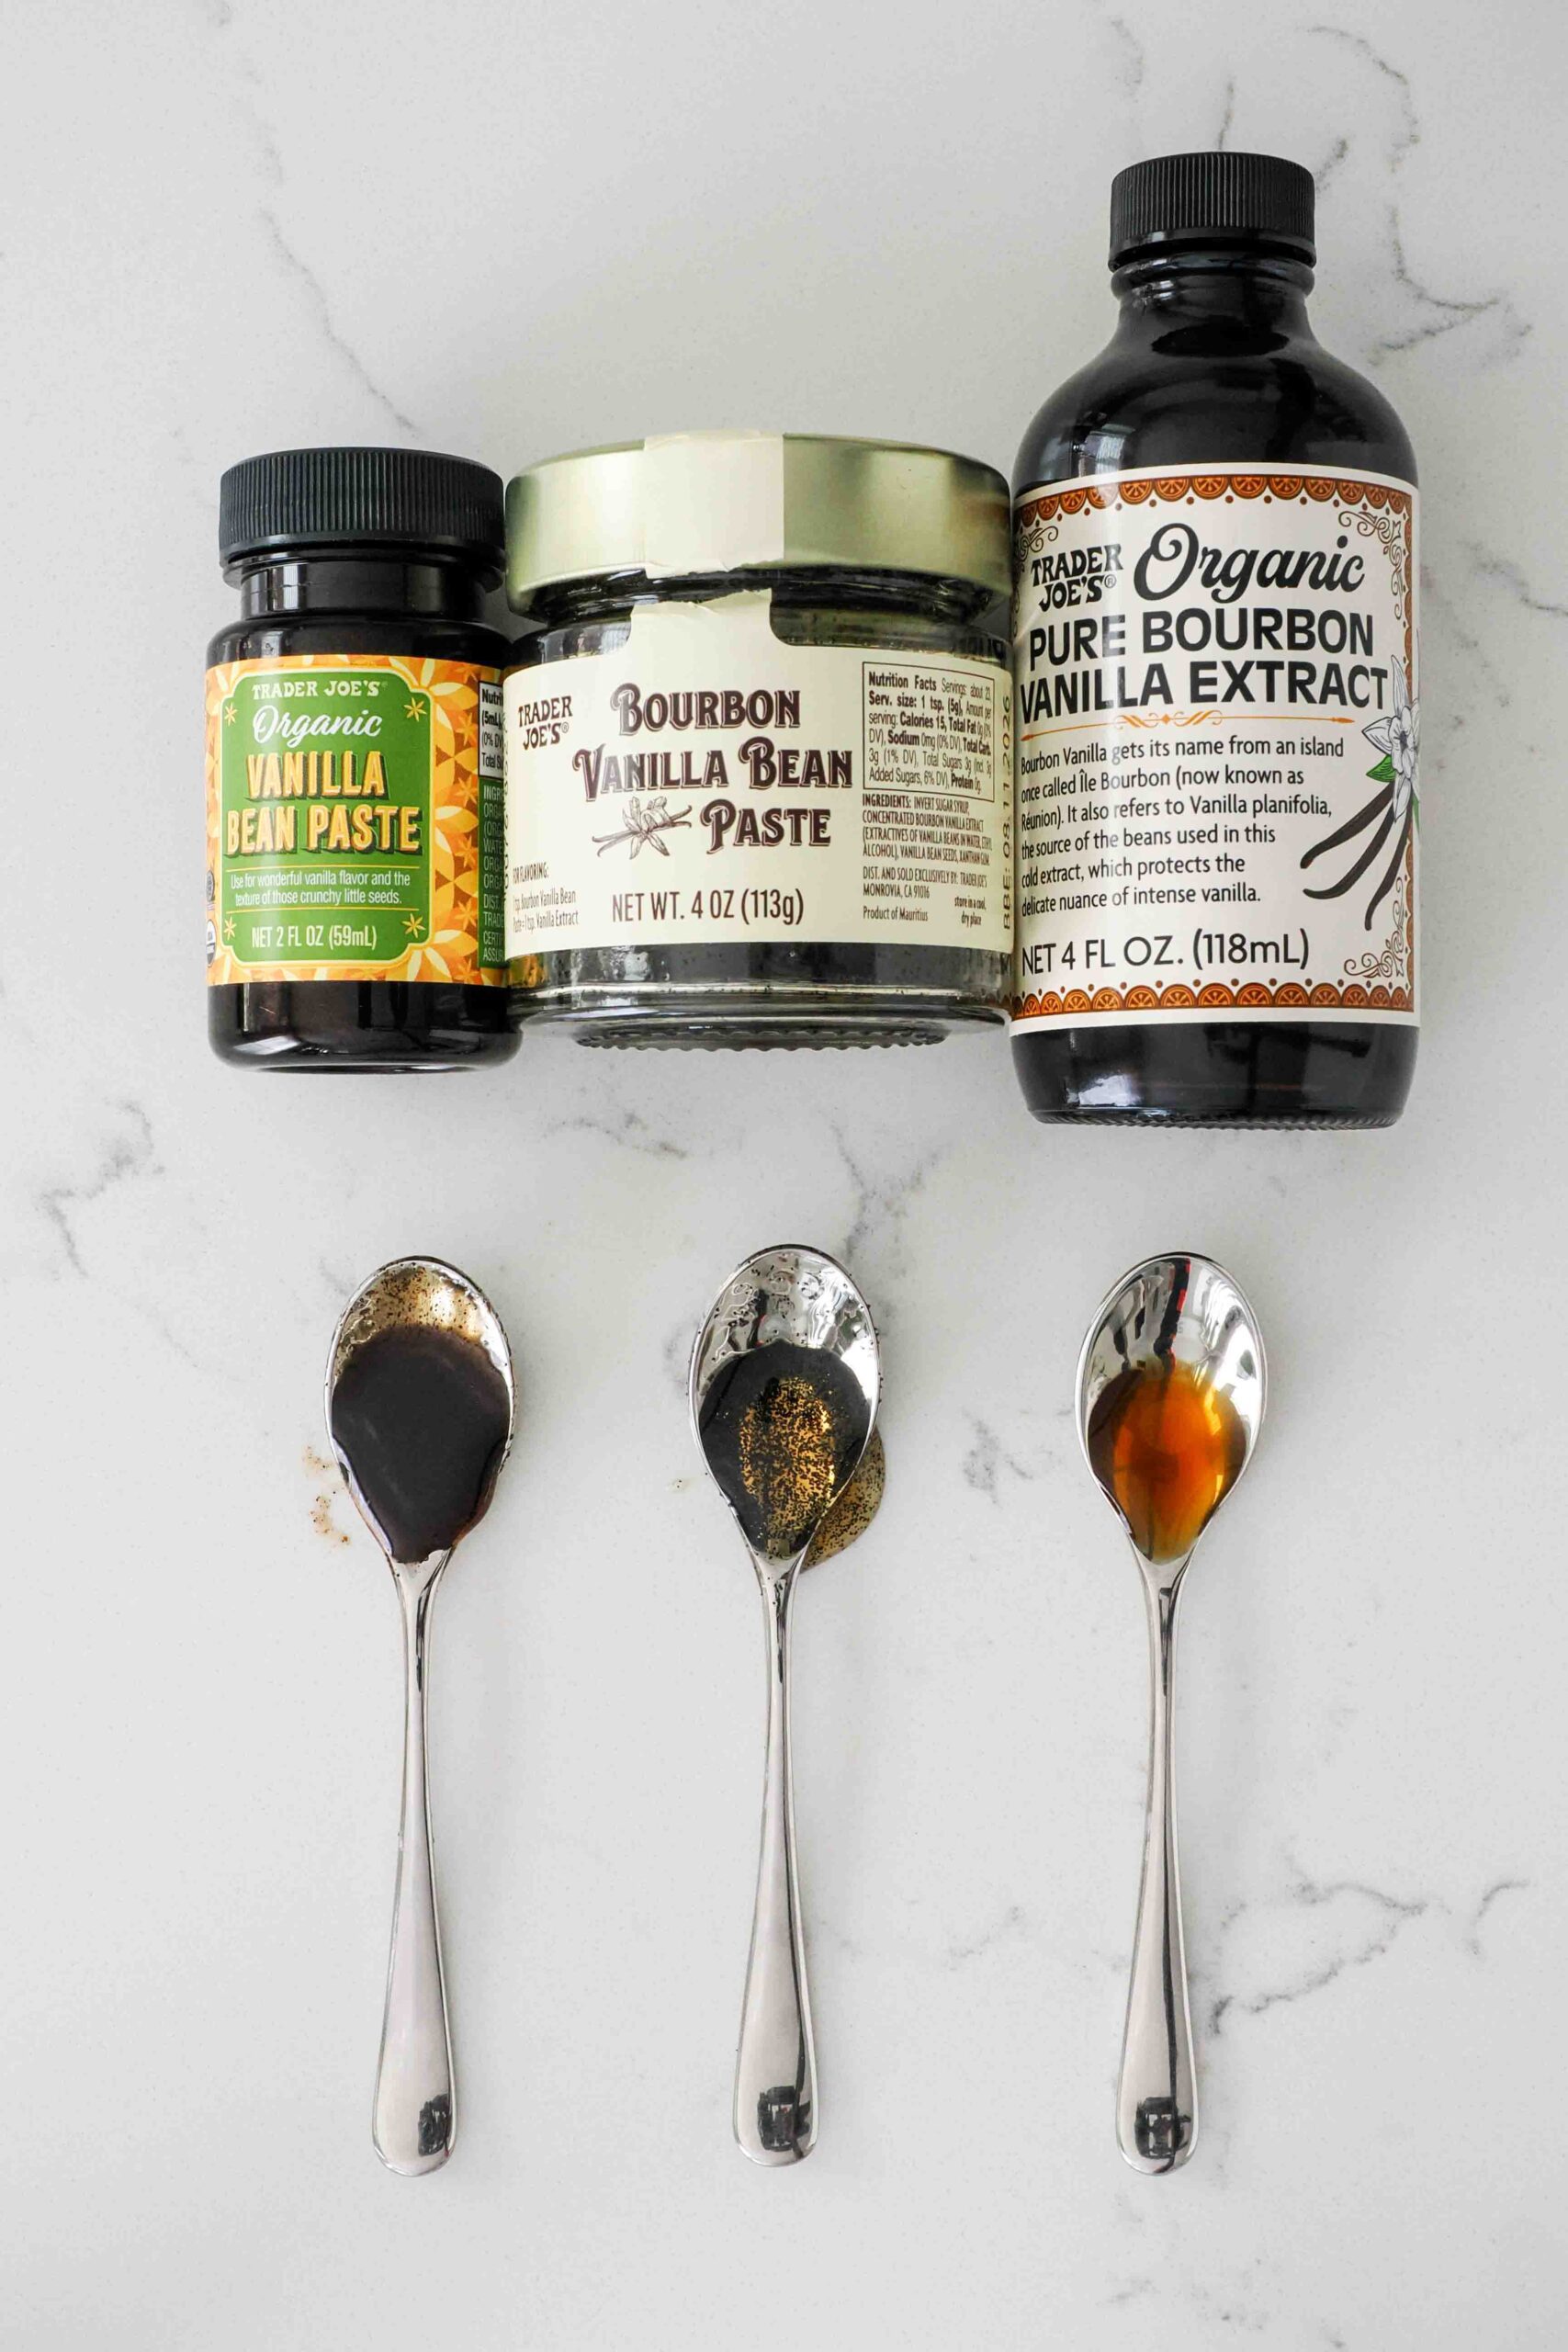 Three Trader Joe's vanilla products side by side, with product in coffee spoons.